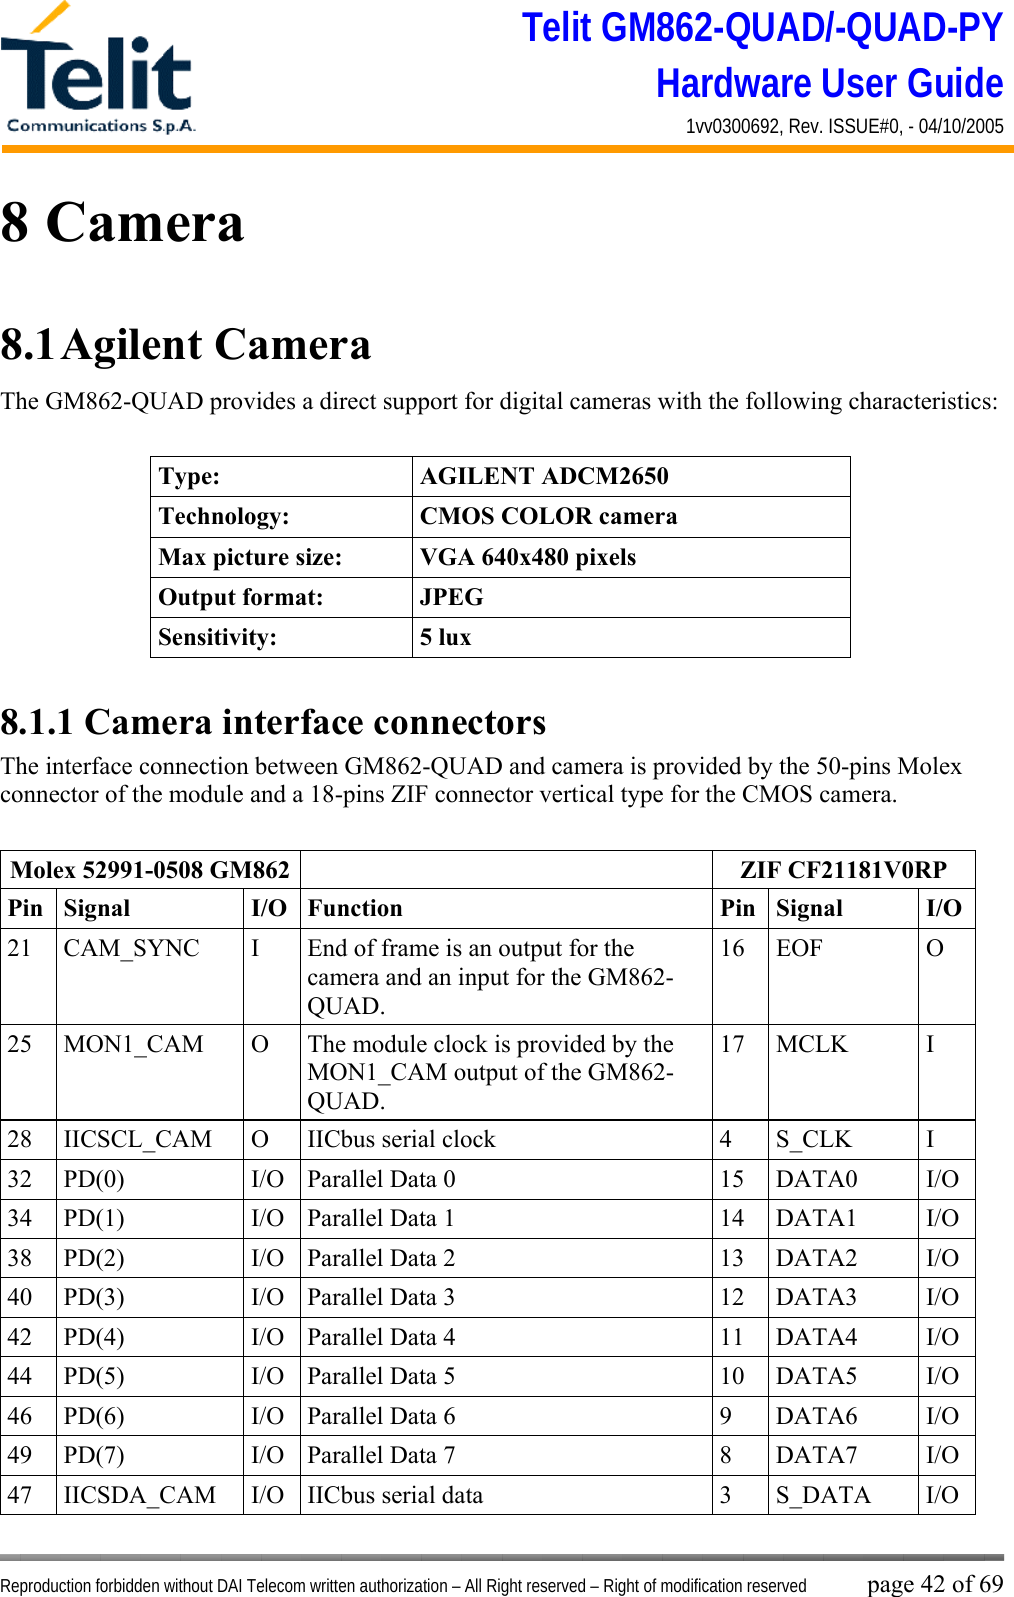 Telit GM862-QUAD/-QUAD-PY Hardware User Guide 1vv0300692, Rev. ISSUE#0, - 04/10/2005   Reproduction forbidden without DAI Telecom written authorization – All Right reserved – Right of modification reserved page 42 of 69 8 Camera 8.1 Agilent  Camera The GM862-QUAD provides a direct support for digital cameras with the following characteristics:  Type: AGILENT ADCM2650 Technology:  CMOS COLOR camera Max picture size:  VGA 640x480 pixels Output format:  JPEG Sensitivity: 5 lux  8.1.1 Camera interface connectors The interface connection between GM862-QUAD and camera is provided by the 50-pins Molex connector of the module and a 18-pins ZIF connector vertical type for the CMOS camera.  Molex 52991-0508 GM862    ZIF CF21181V0RP Pin Signal  I/O Function  Pin Signal  I/O21  CAM_SYNC  I  End of frame is an output for the camera and an input for the GM862-QUAD. 16 EOF  O 25  MON1_CAM  O  The module clock is provided by the MON1_CAM output of the GM862-QUAD. 17 MCLK  I 28  IICSCL_CAM  O  IICbus serial clock   4  S_CLK  I 32  PD(0)  I/O  Parallel Data 0  15  DATA0  I/O 34  PD(1)  I/O  Parallel Data 1  14  DATA1  I/O 38  PD(2)  I/O  Parallel Data 2  13  DATA2  I/O 40  PD(3)  I/O  Parallel Data 3  12  DATA3  I/O 42  PD(4)  I/O  Parallel Data 4  11  DATA4  I/O 44  PD(5)  I/O  Parallel Data 5  10  DATA5  I/O 46  PD(6)  I/O  Parallel Data 6  9  DATA6  I/O 49  PD(7)  I/O  Parallel Data 7  8  DATA7  I/O 47  IICSDA_CAM  I/O  IICbus serial data  3  S_DATA  I/O 